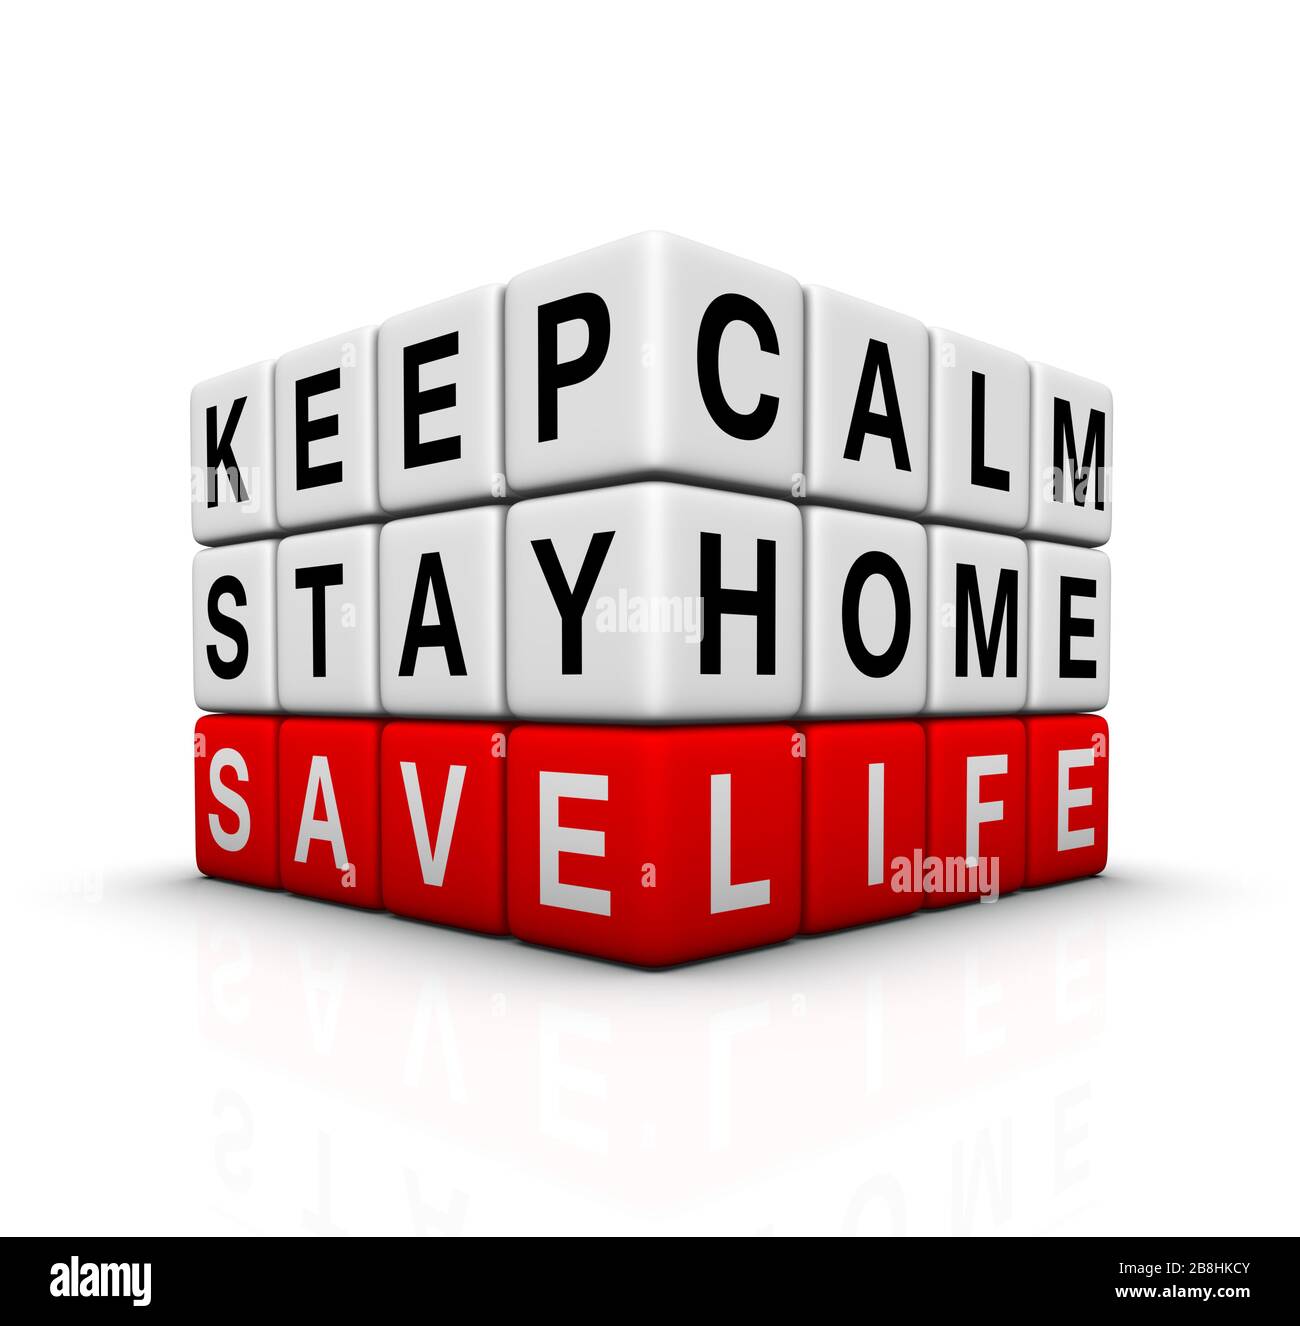 Keep Calm, Stay Home and Save Life sign. 3D illustration. Stock Photo